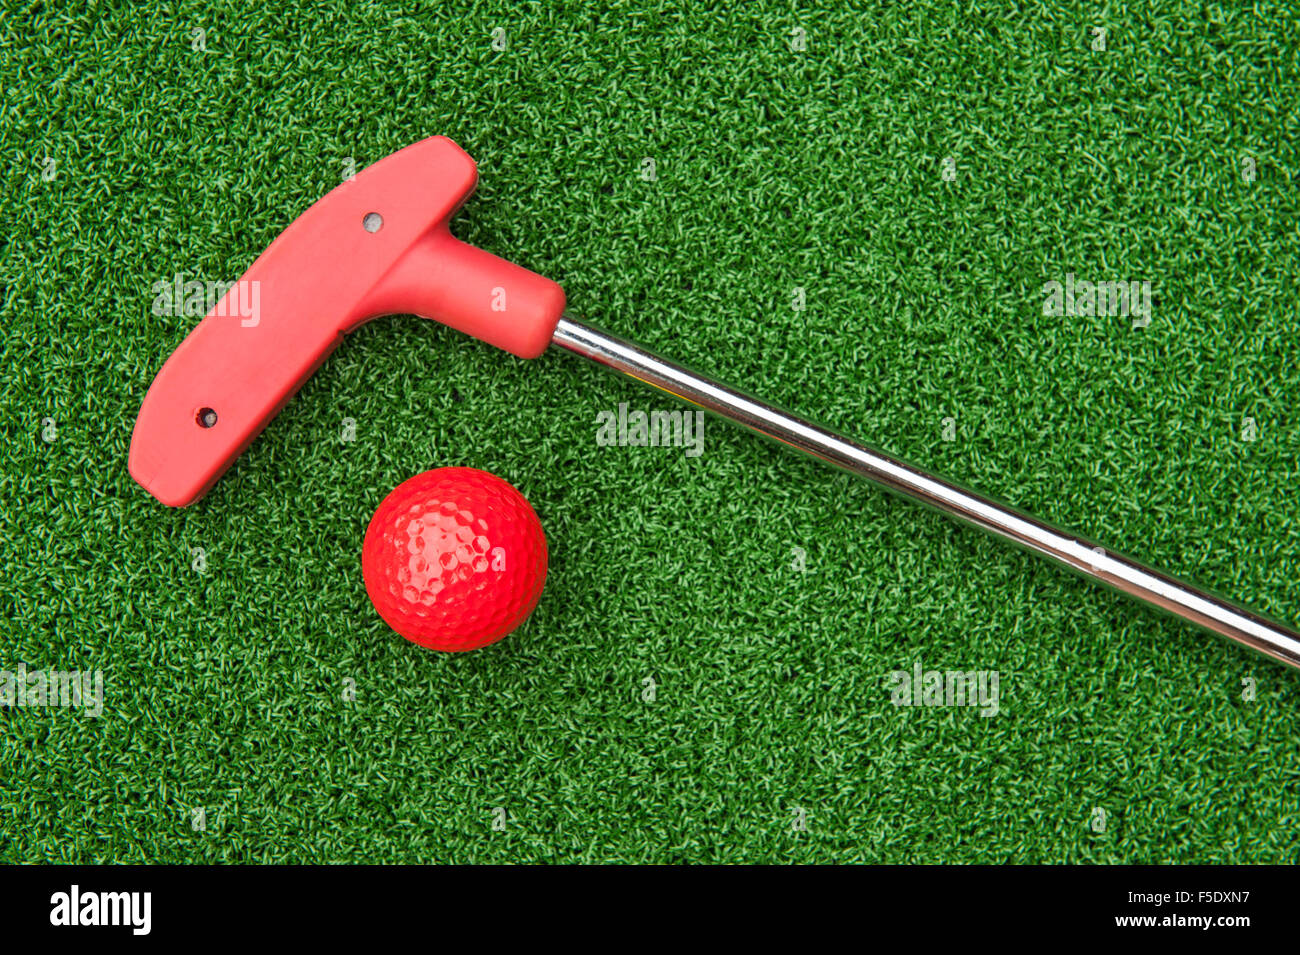 Red mini golf putter and ball laying on artificial turf Stock Photo